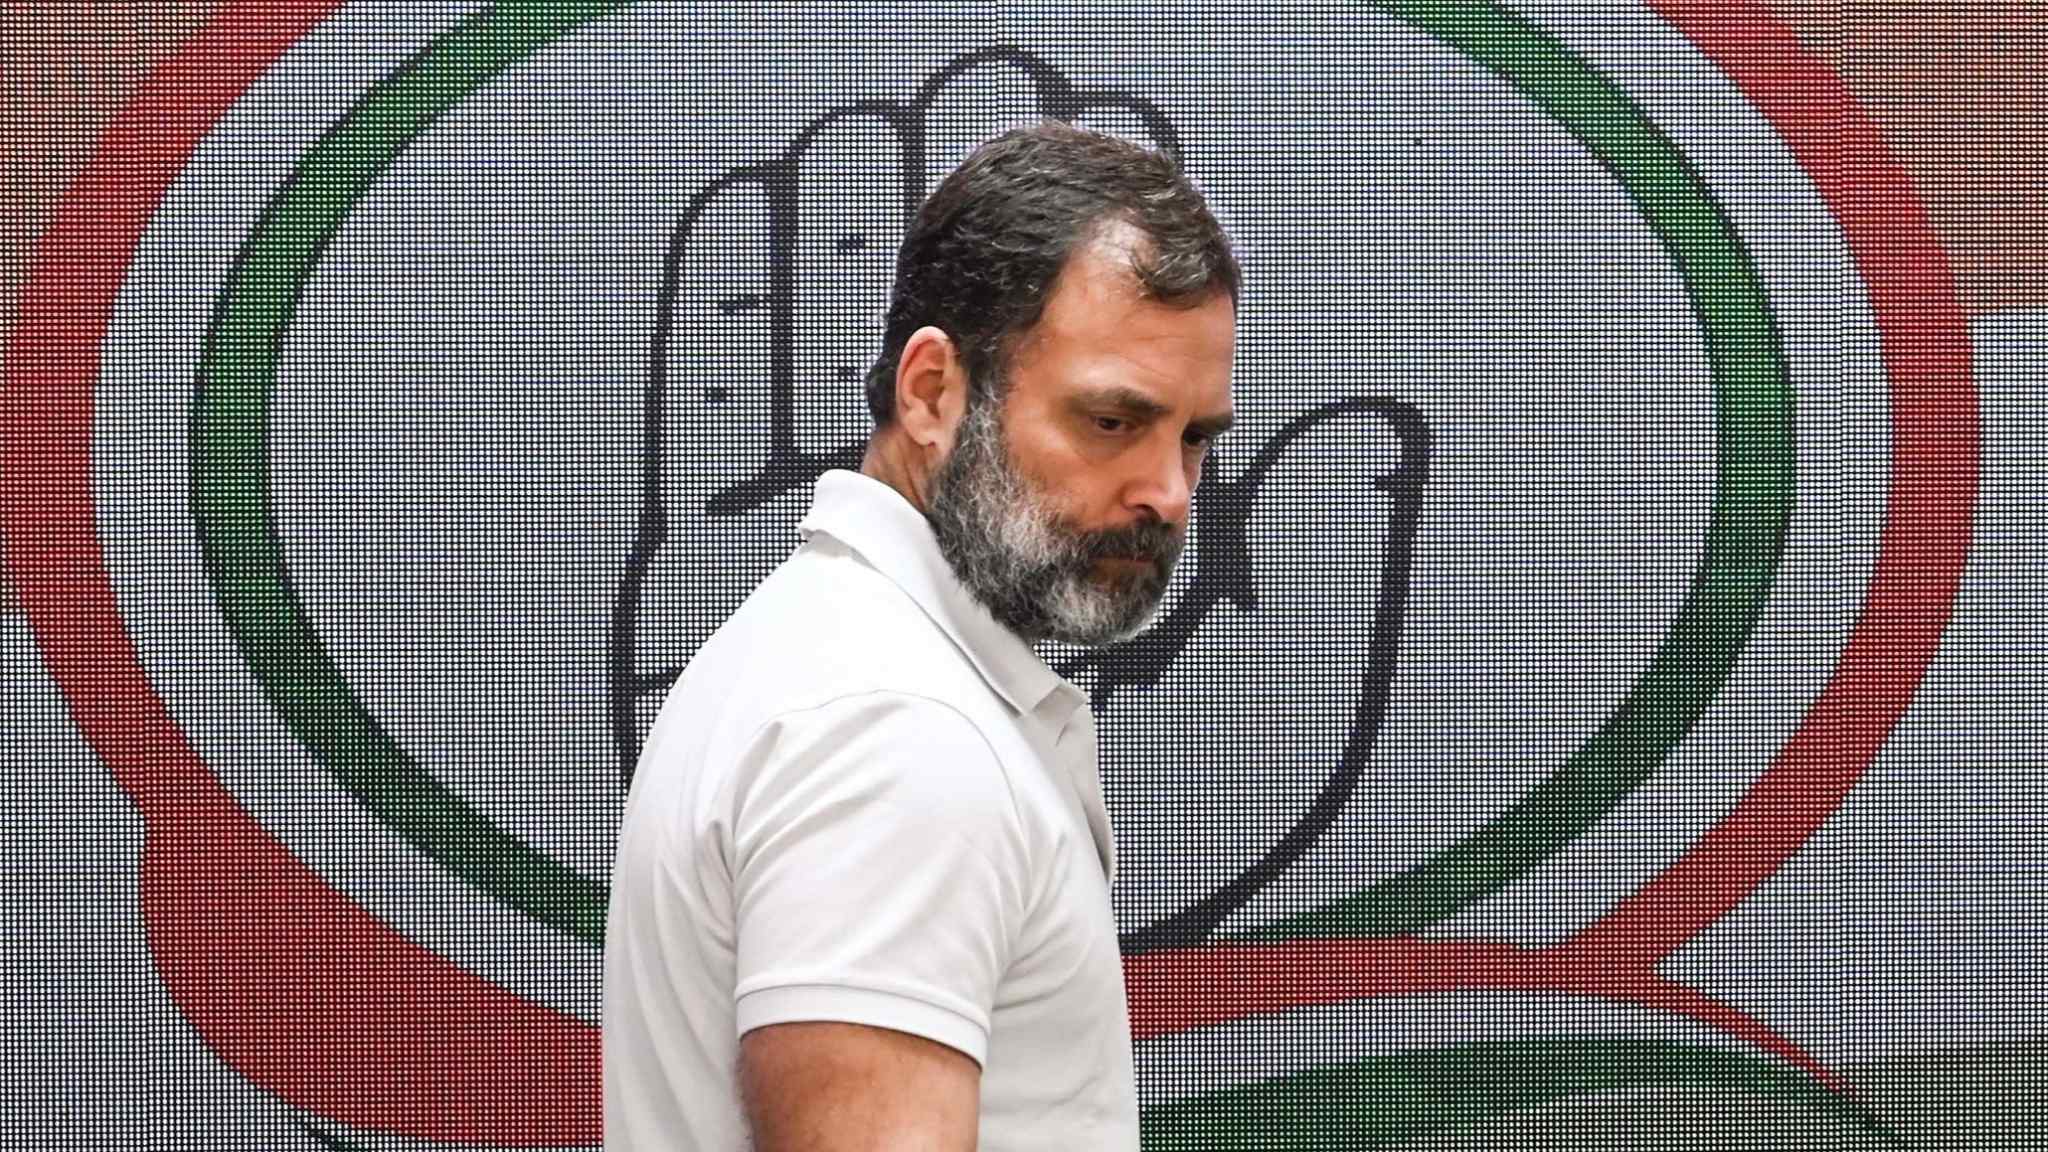 Rahul Gandhi sentenced to two years in prison over Modi remarks